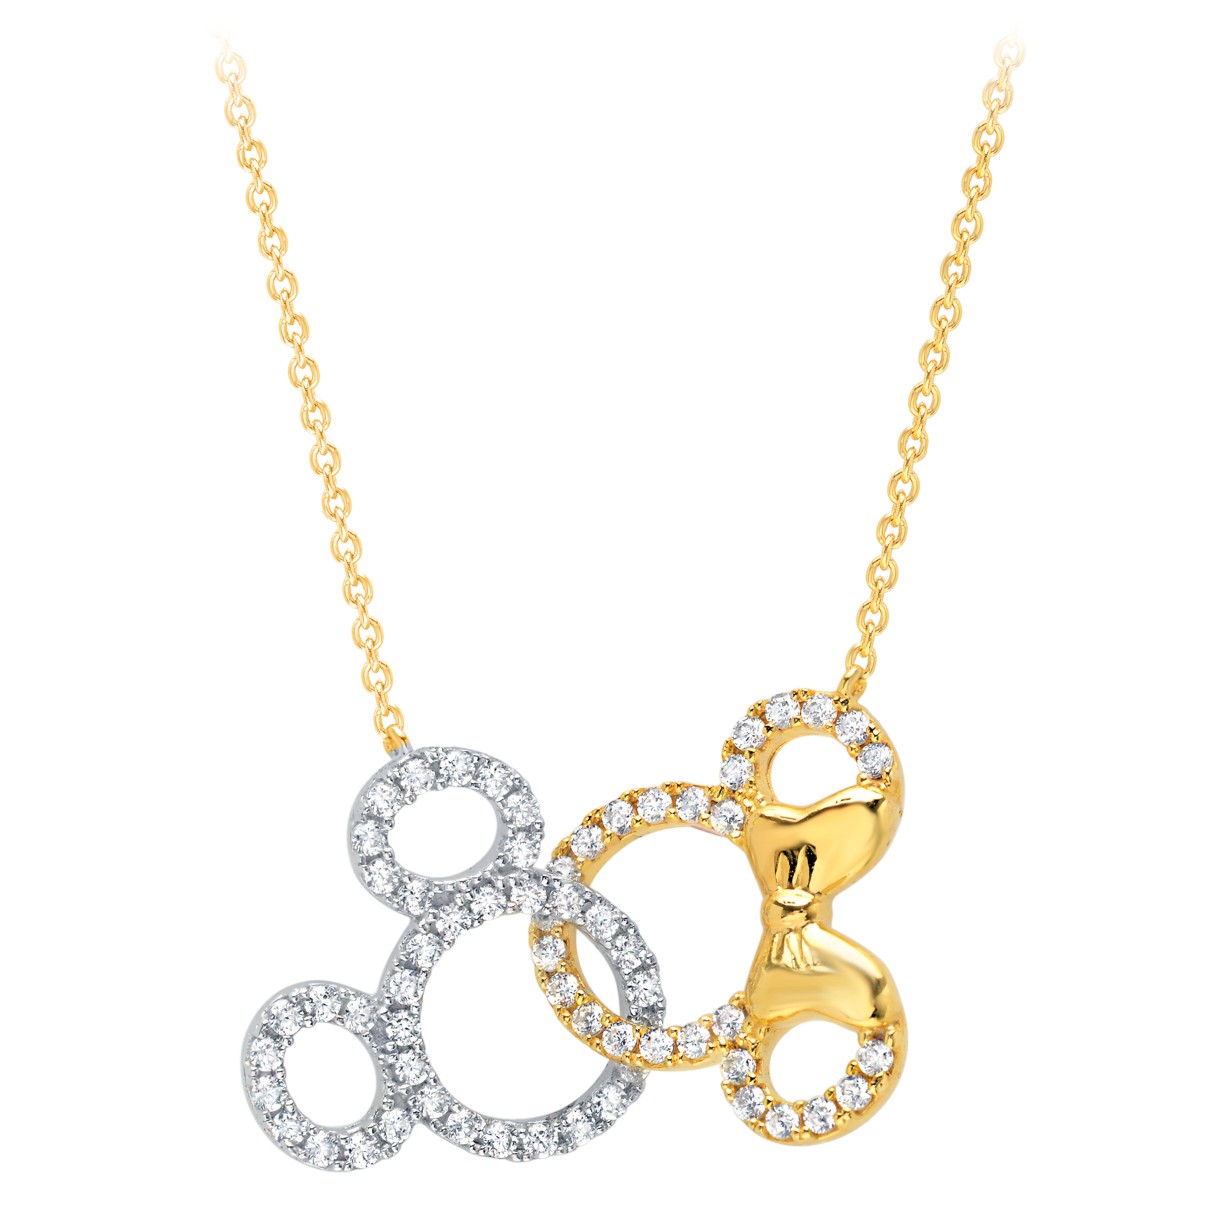 Mickey and Minnie Mouse Interlocking Icons Necklace by CRISLU